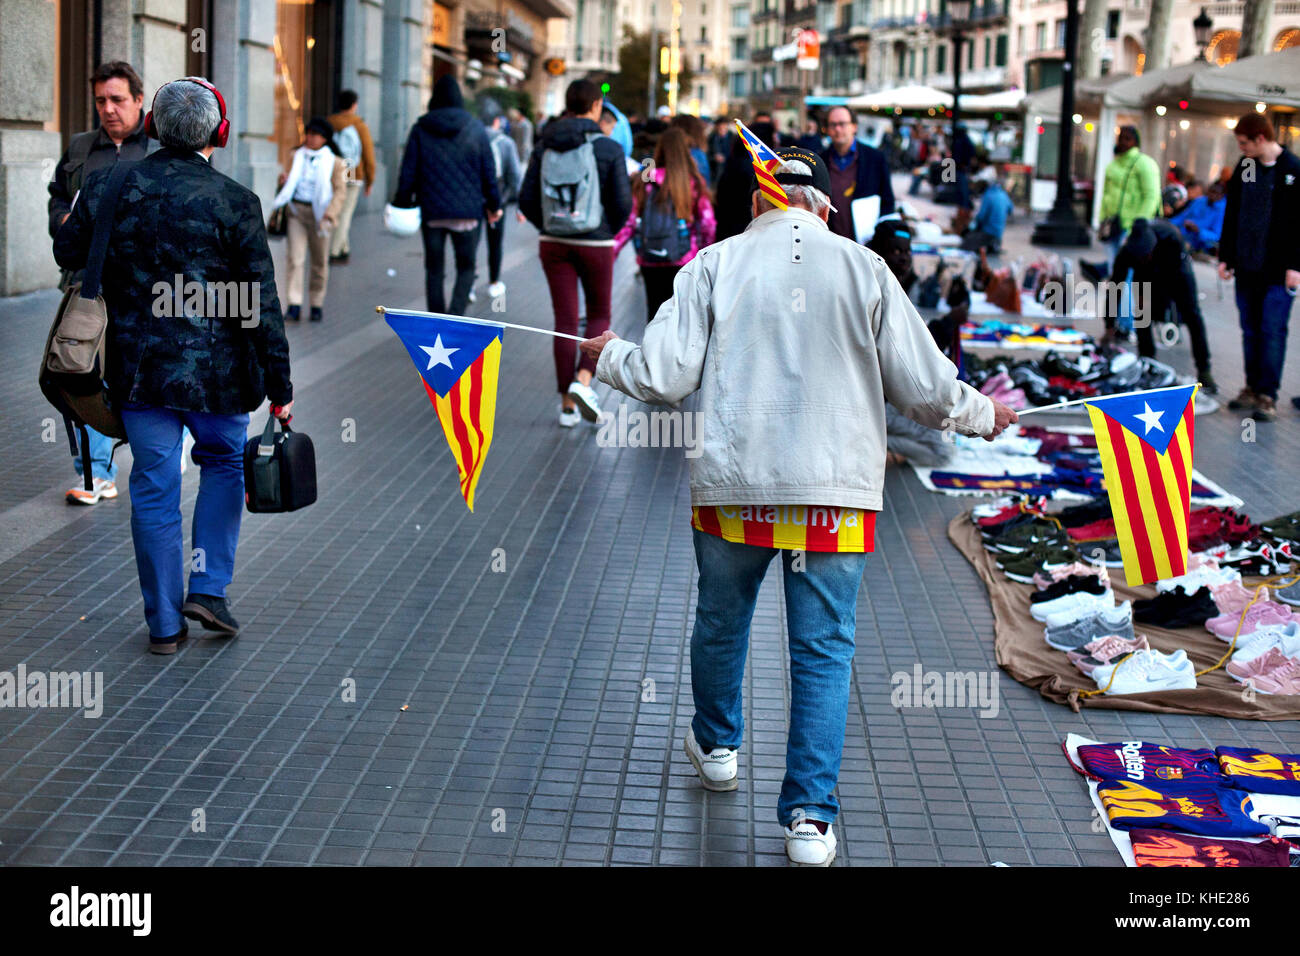 Man walking on the street waving Catalan independence flags, Barcelona, Spain. Stock Photo